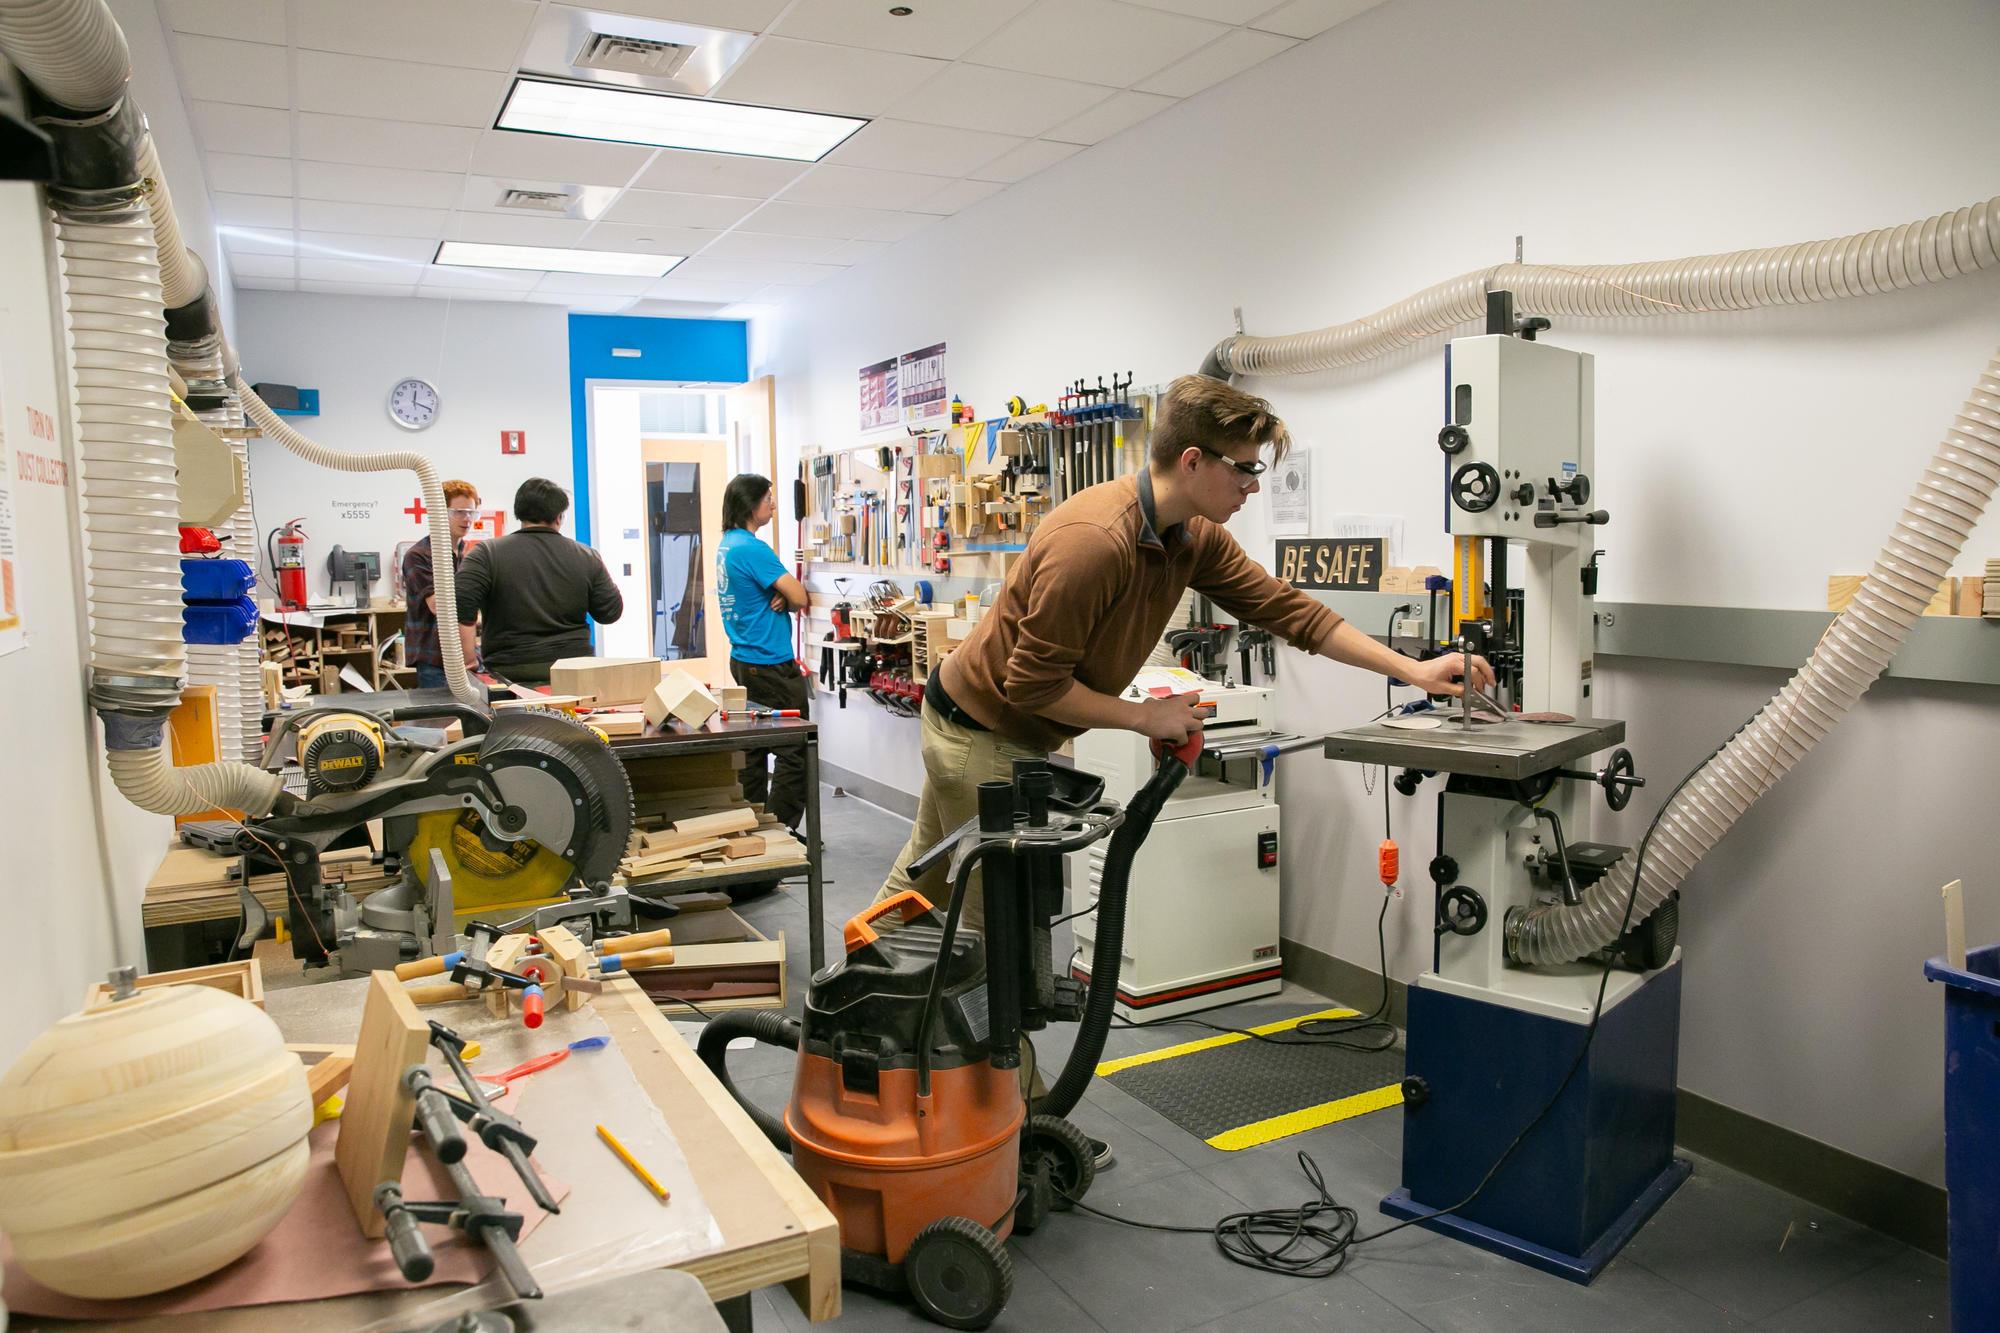 A look inside the Wood Shop at Olin College